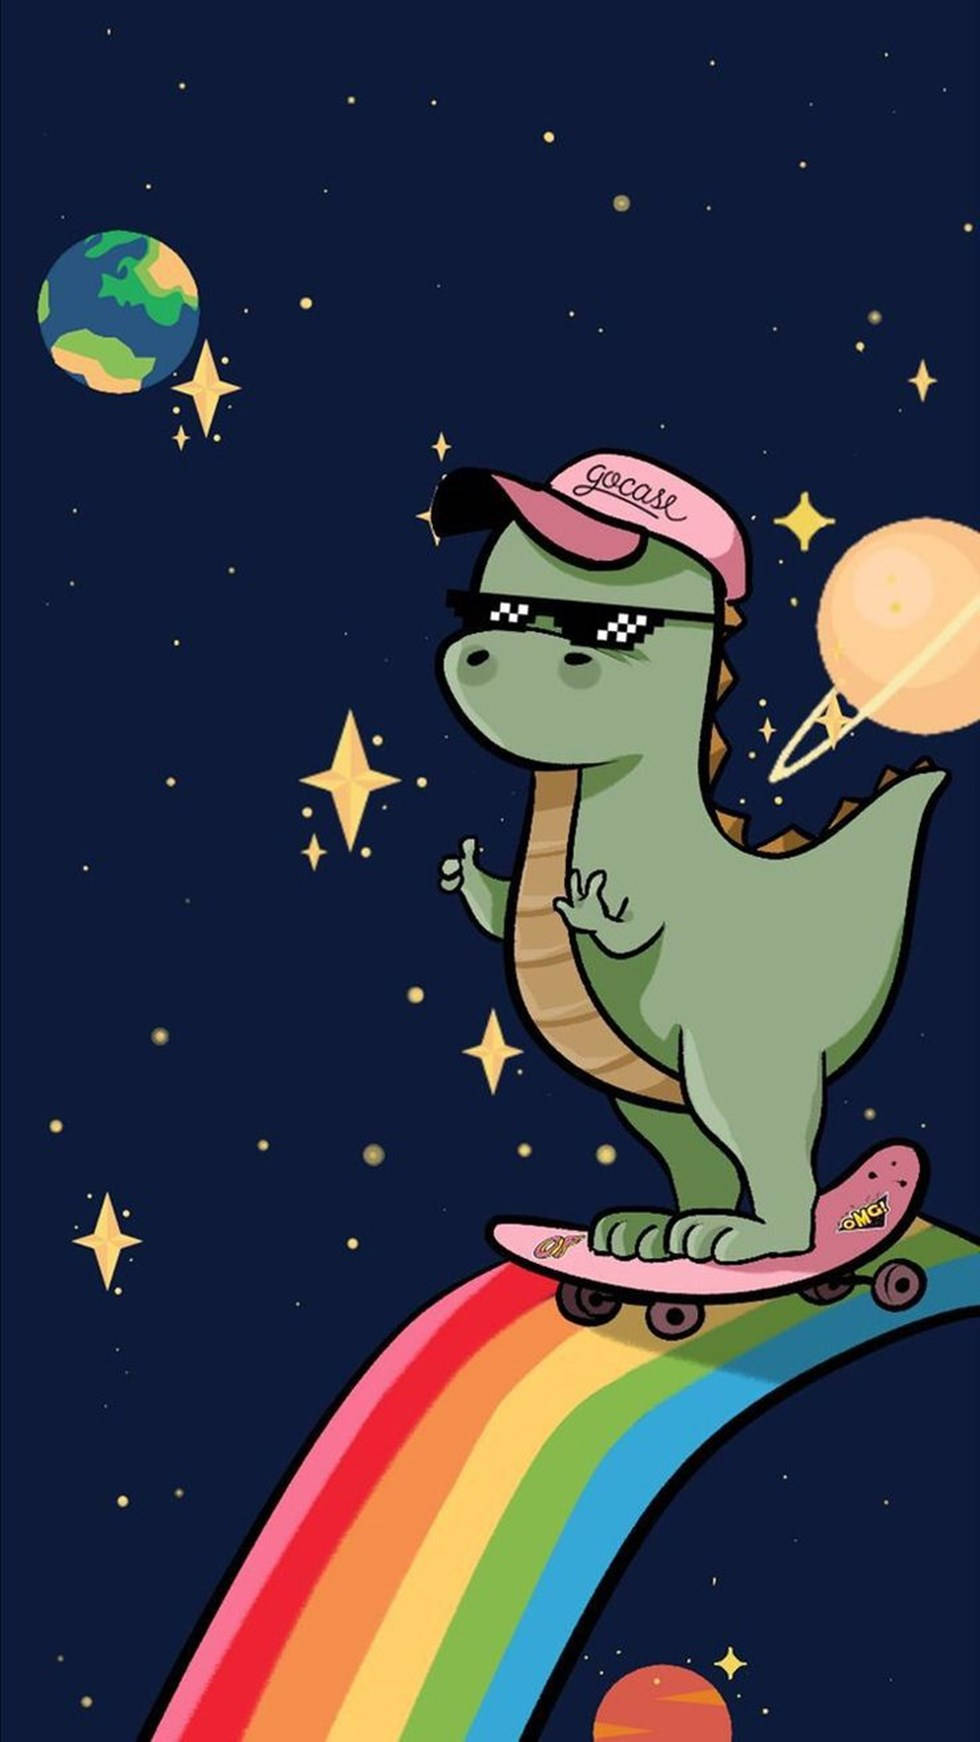 Enjoy Your Day with this Fun and Cute Dinosaur Iphone Wallpaper